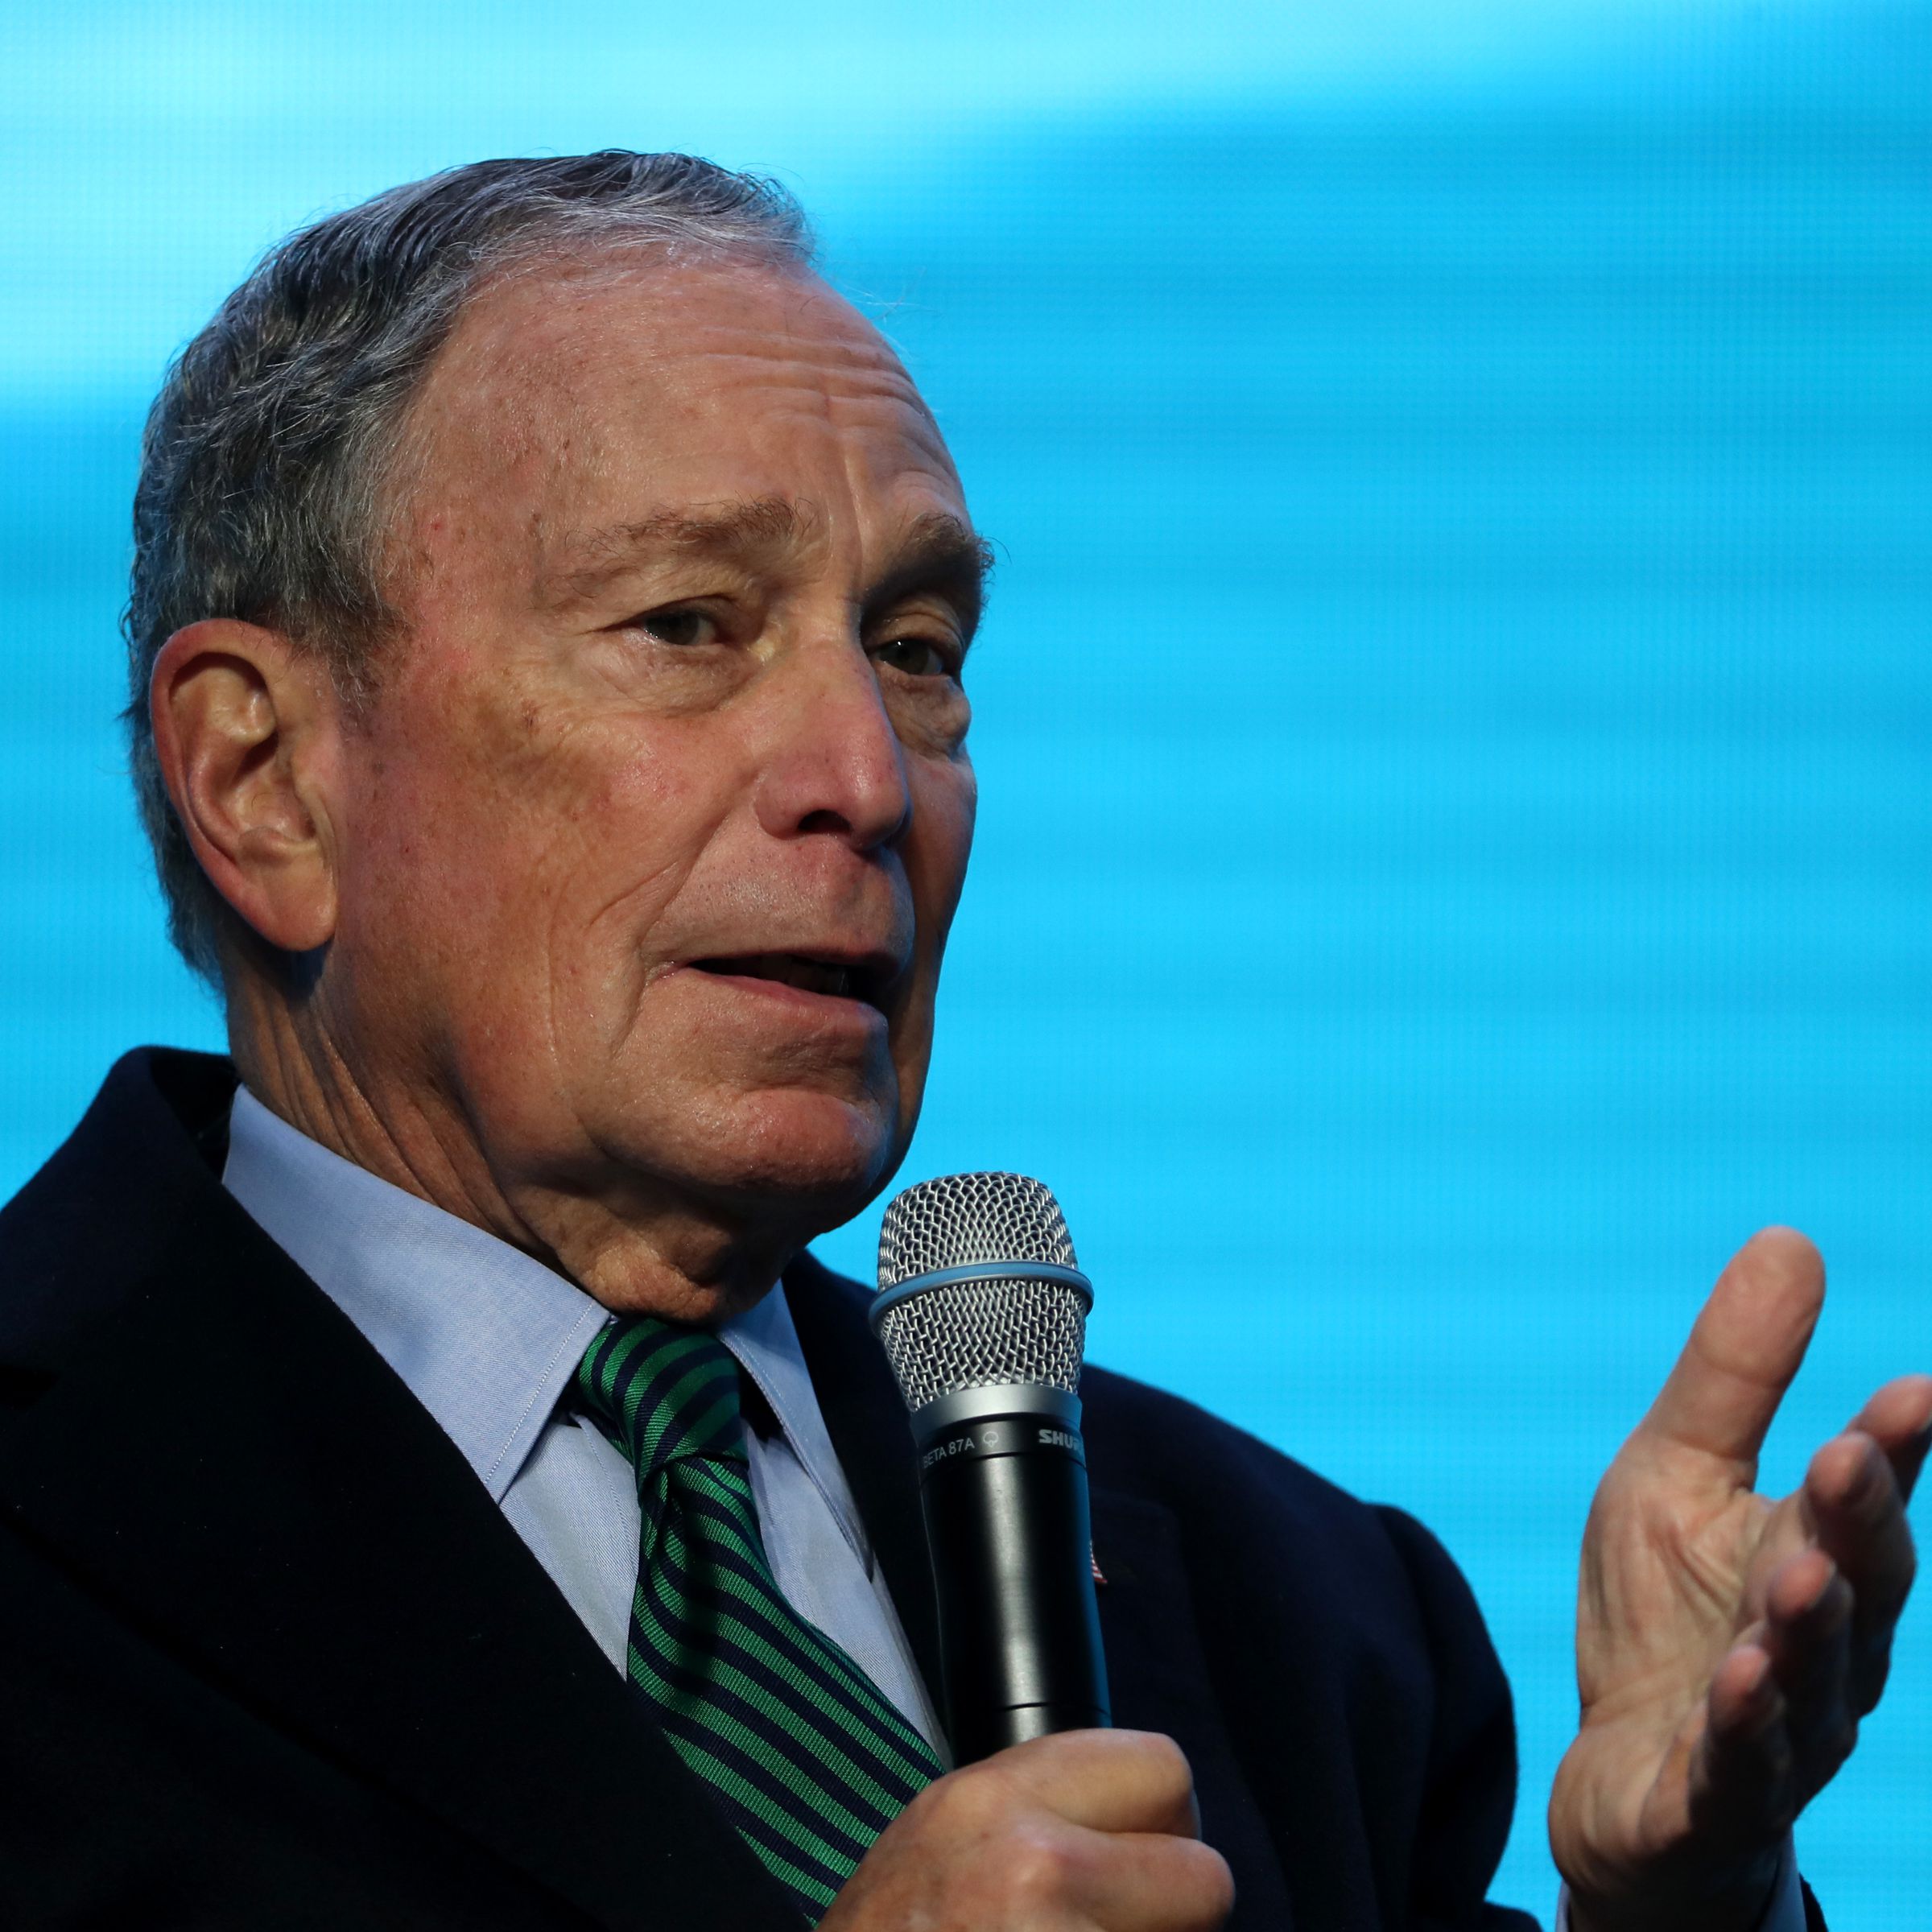 Democratic Presidential Candidate Mike Bloomberg Speaks On Climate Change At The American Geophysical Union Conference